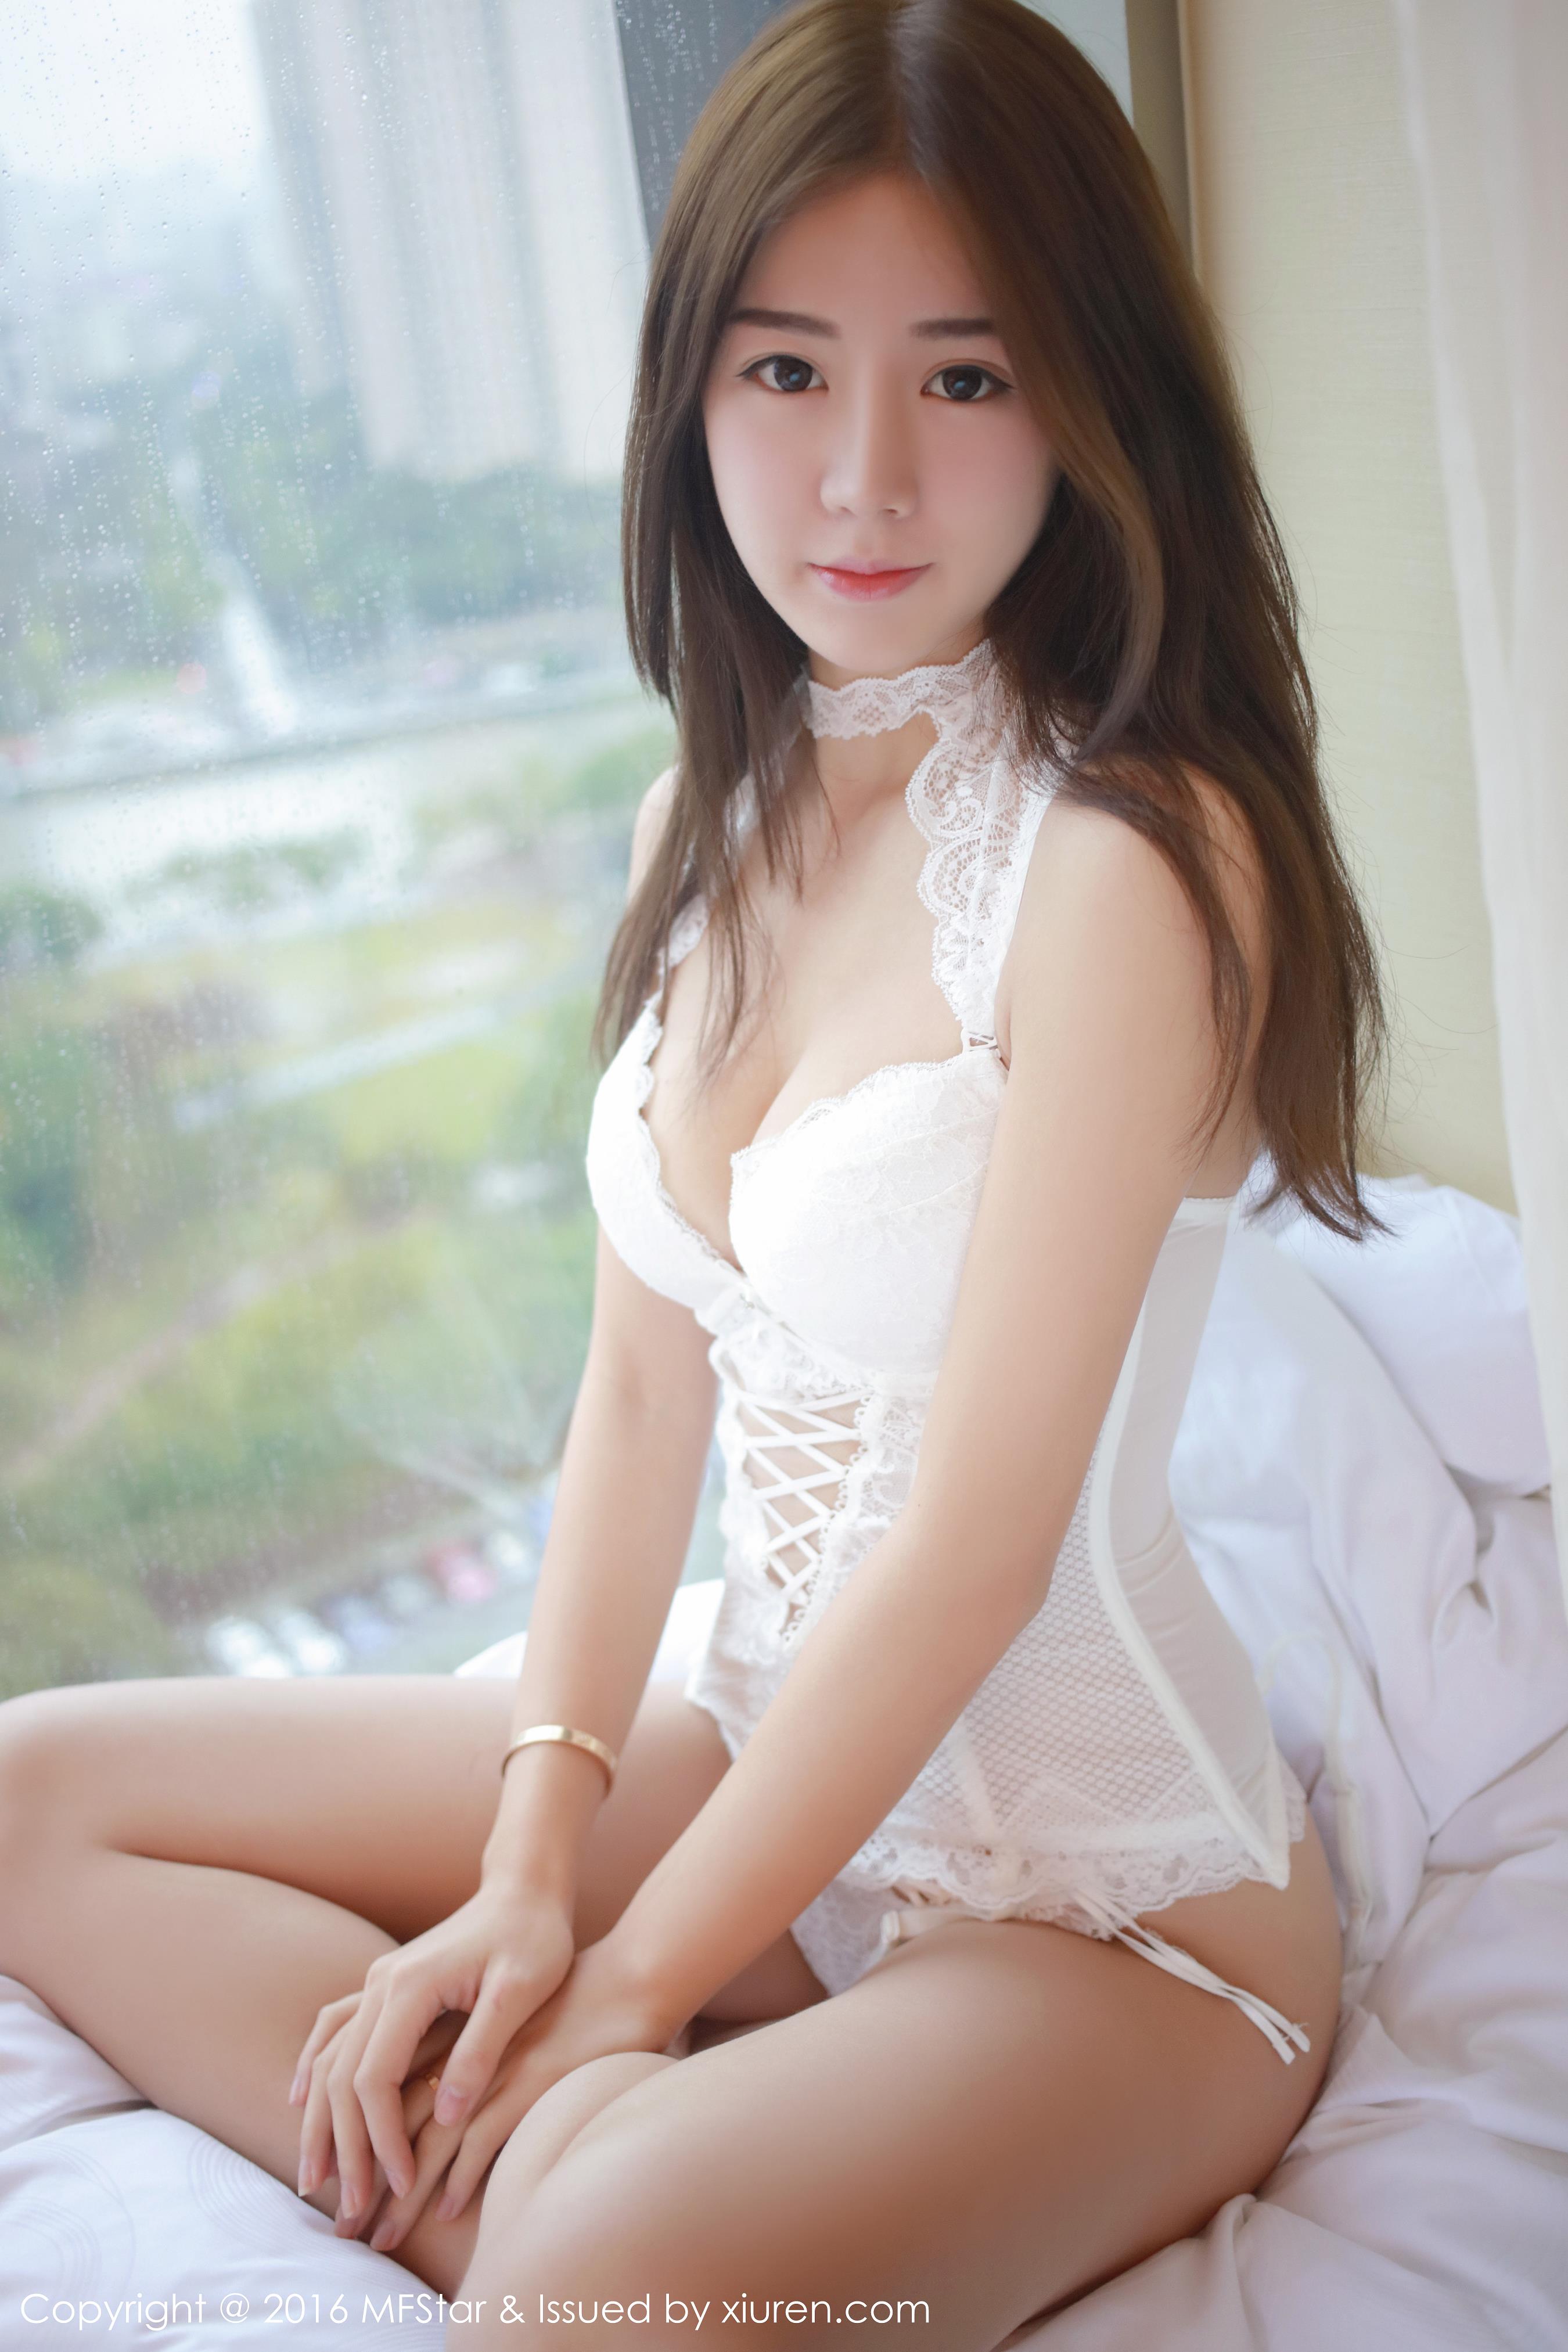 beautiful Chinese girl in lingerie